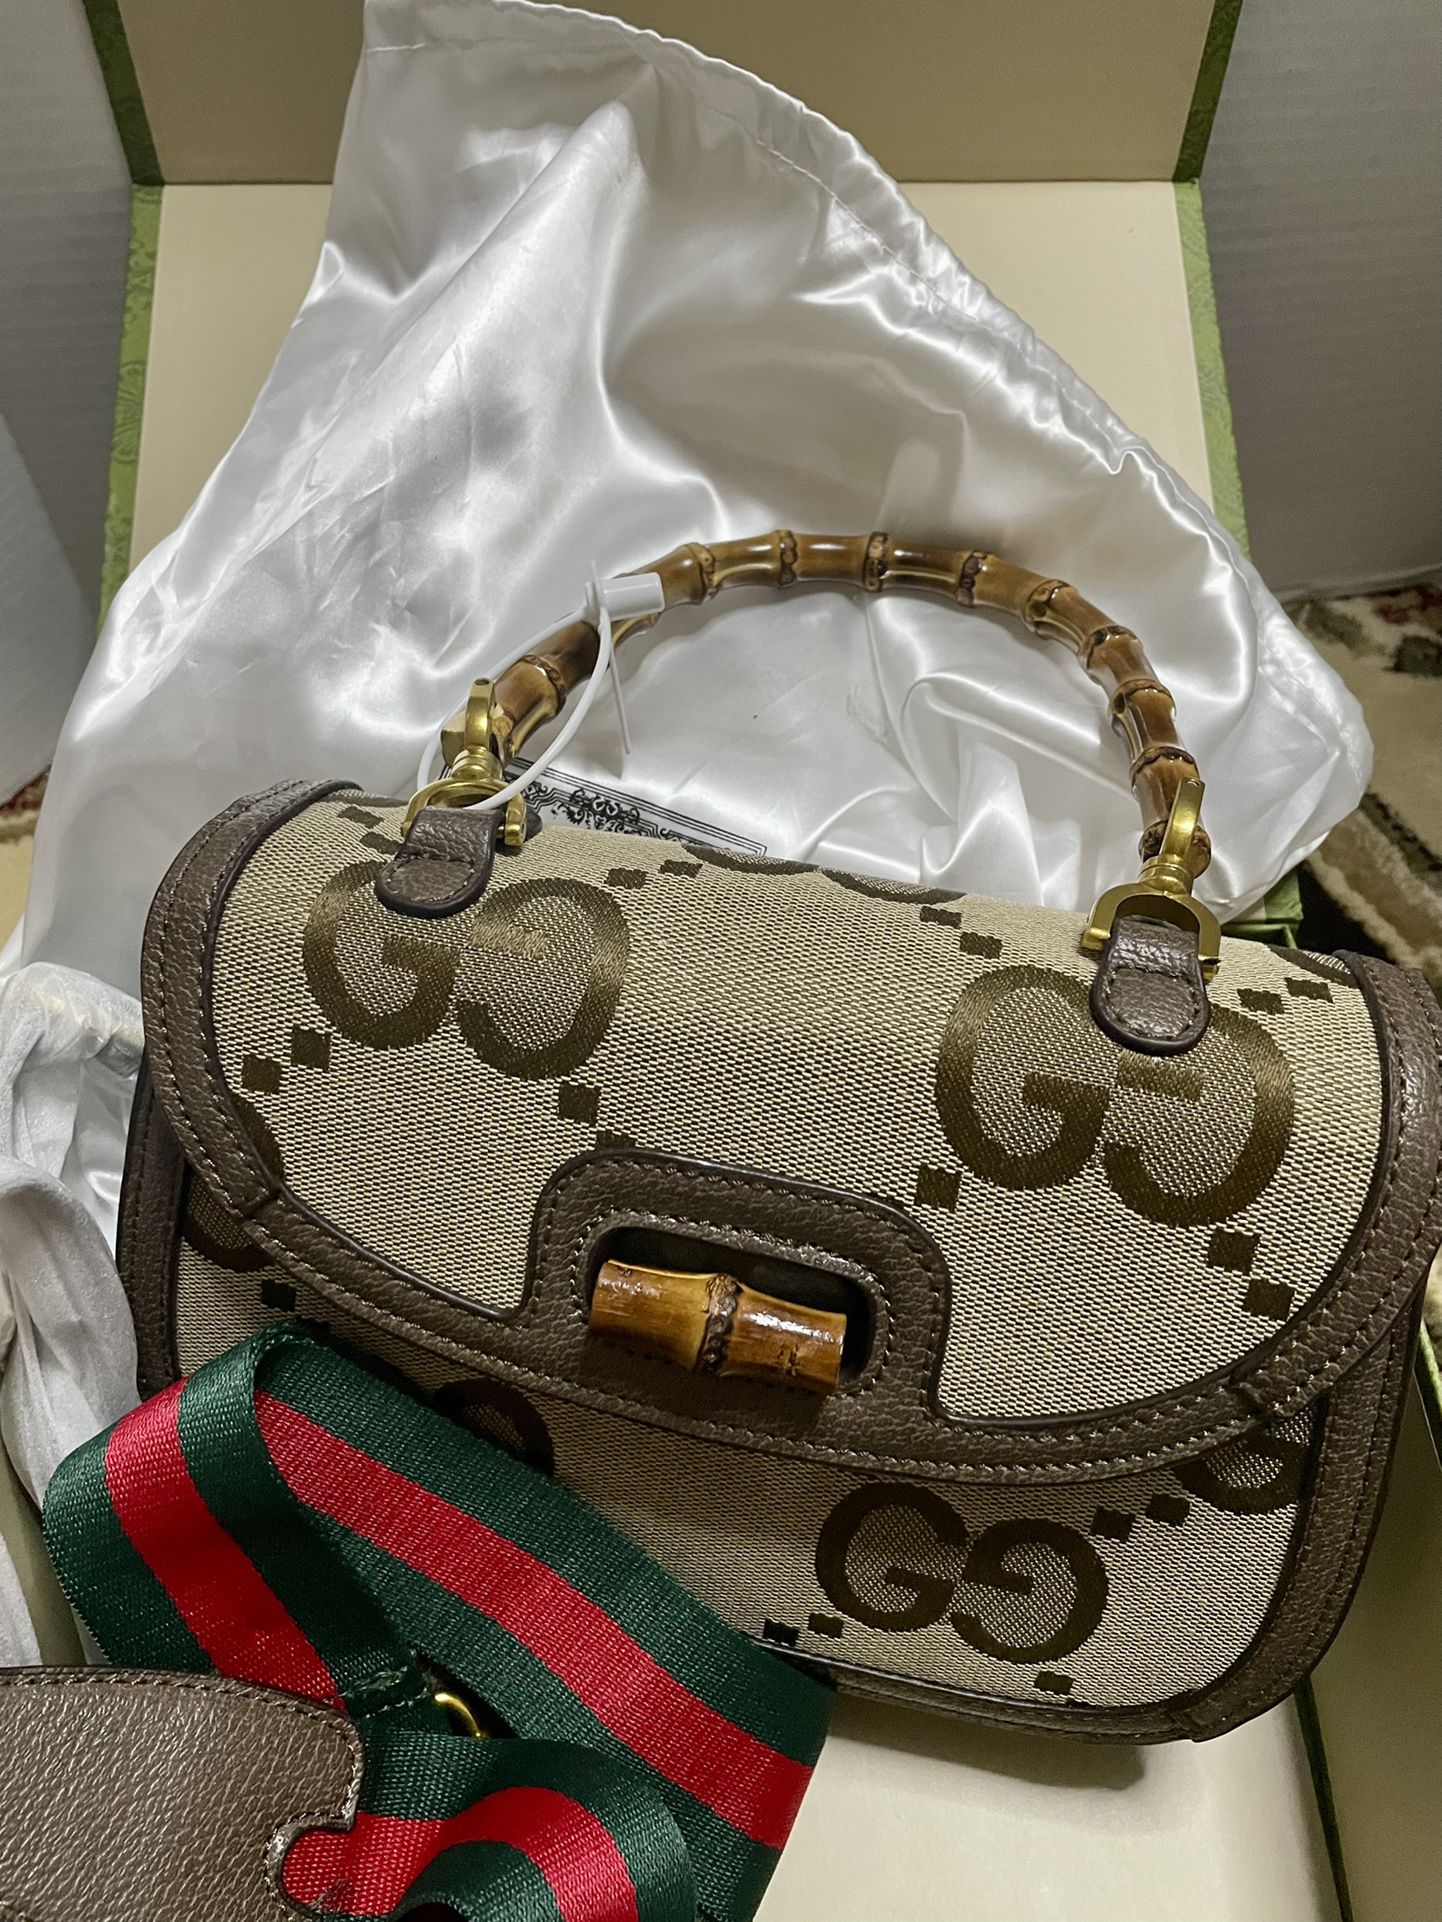 Scintillating Chanel Hobo Bags for Sale in Port Chester, NY - OfferUp